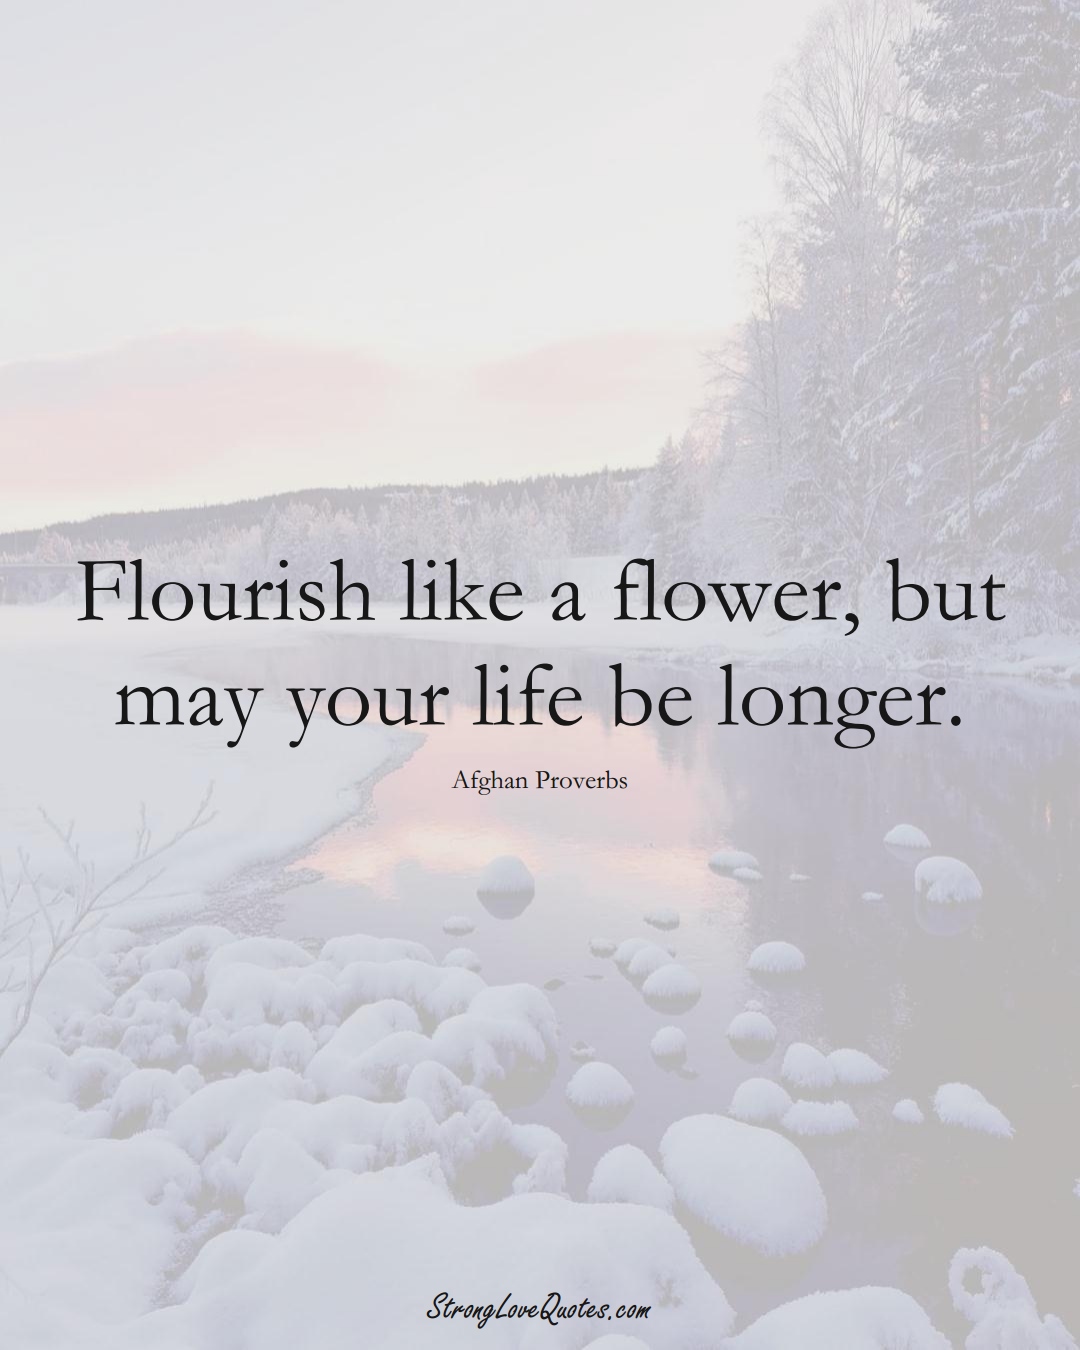 Flourish like a flower, but may your life be longer. (Afghan Sayings);  #AsianSayings